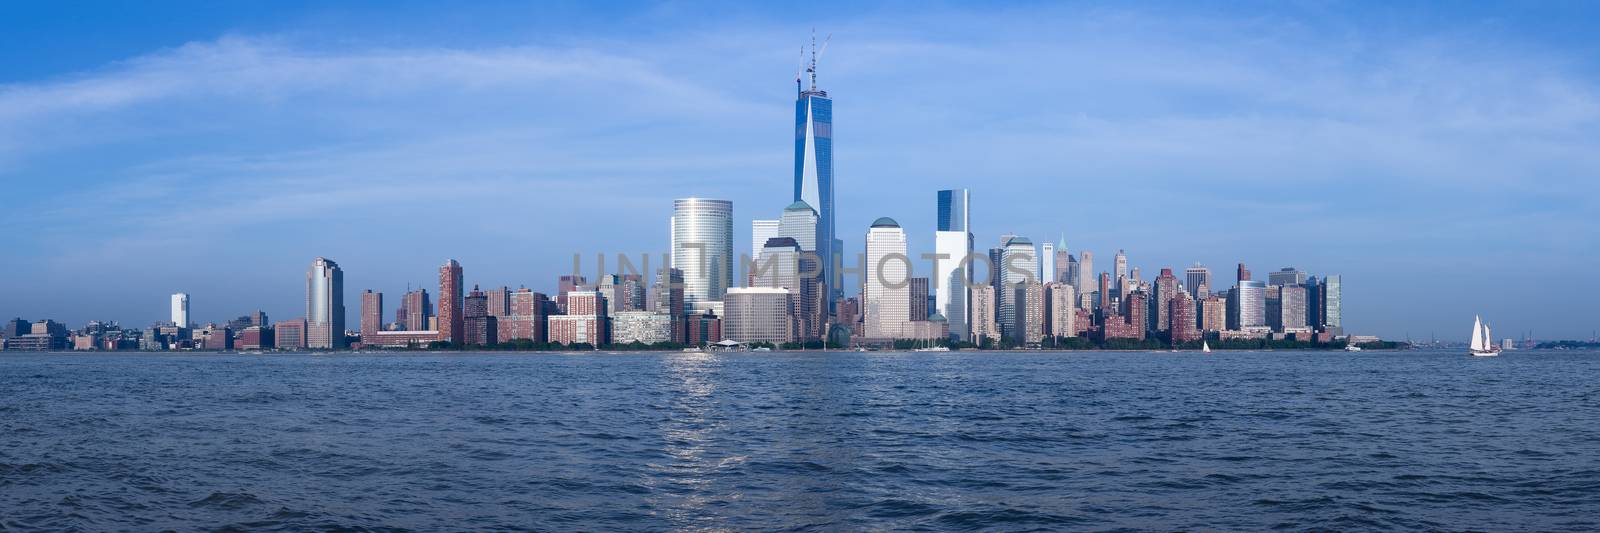 Panorama of lower Manhattan of New York City from Exchange Place at dusk with World Trade Center at full height of 1776 feet May 2013